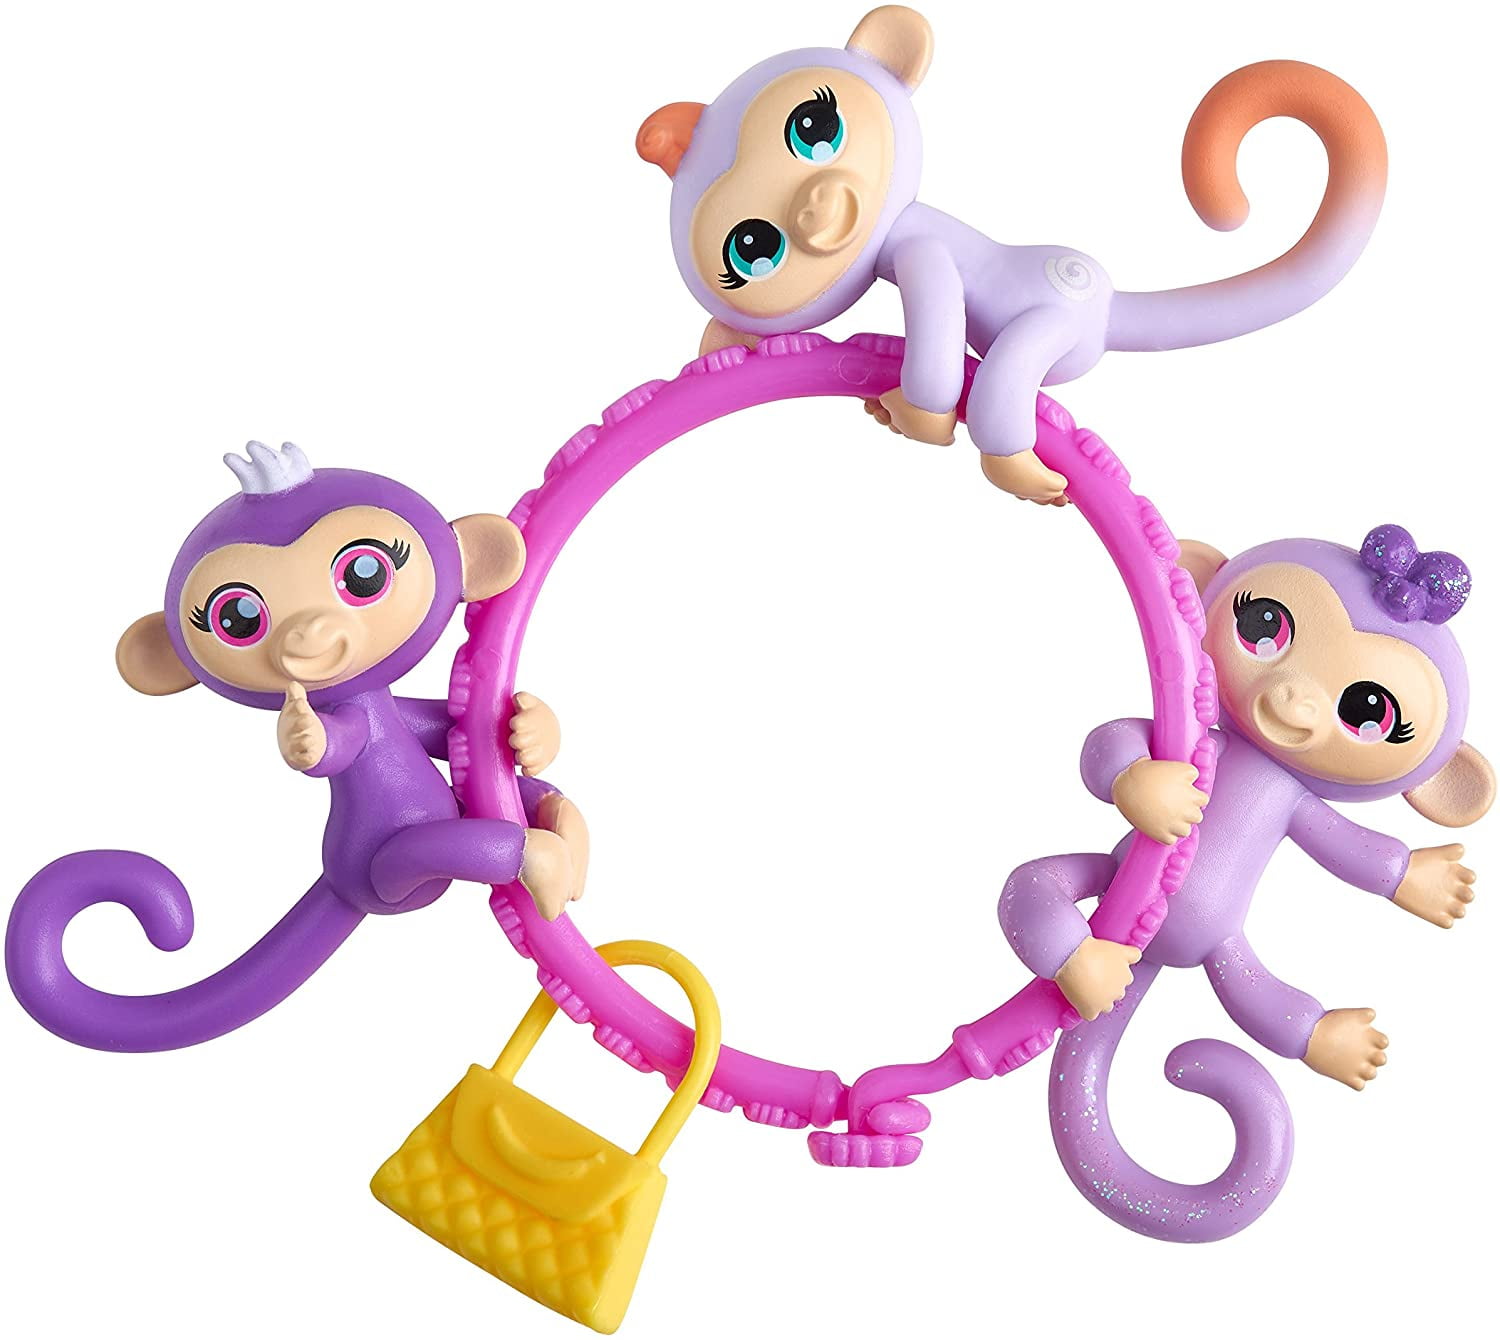 Sensor Puppet Mon Wembley Toys Fingerlings Interactive Baby Monkey Toy for Kids 